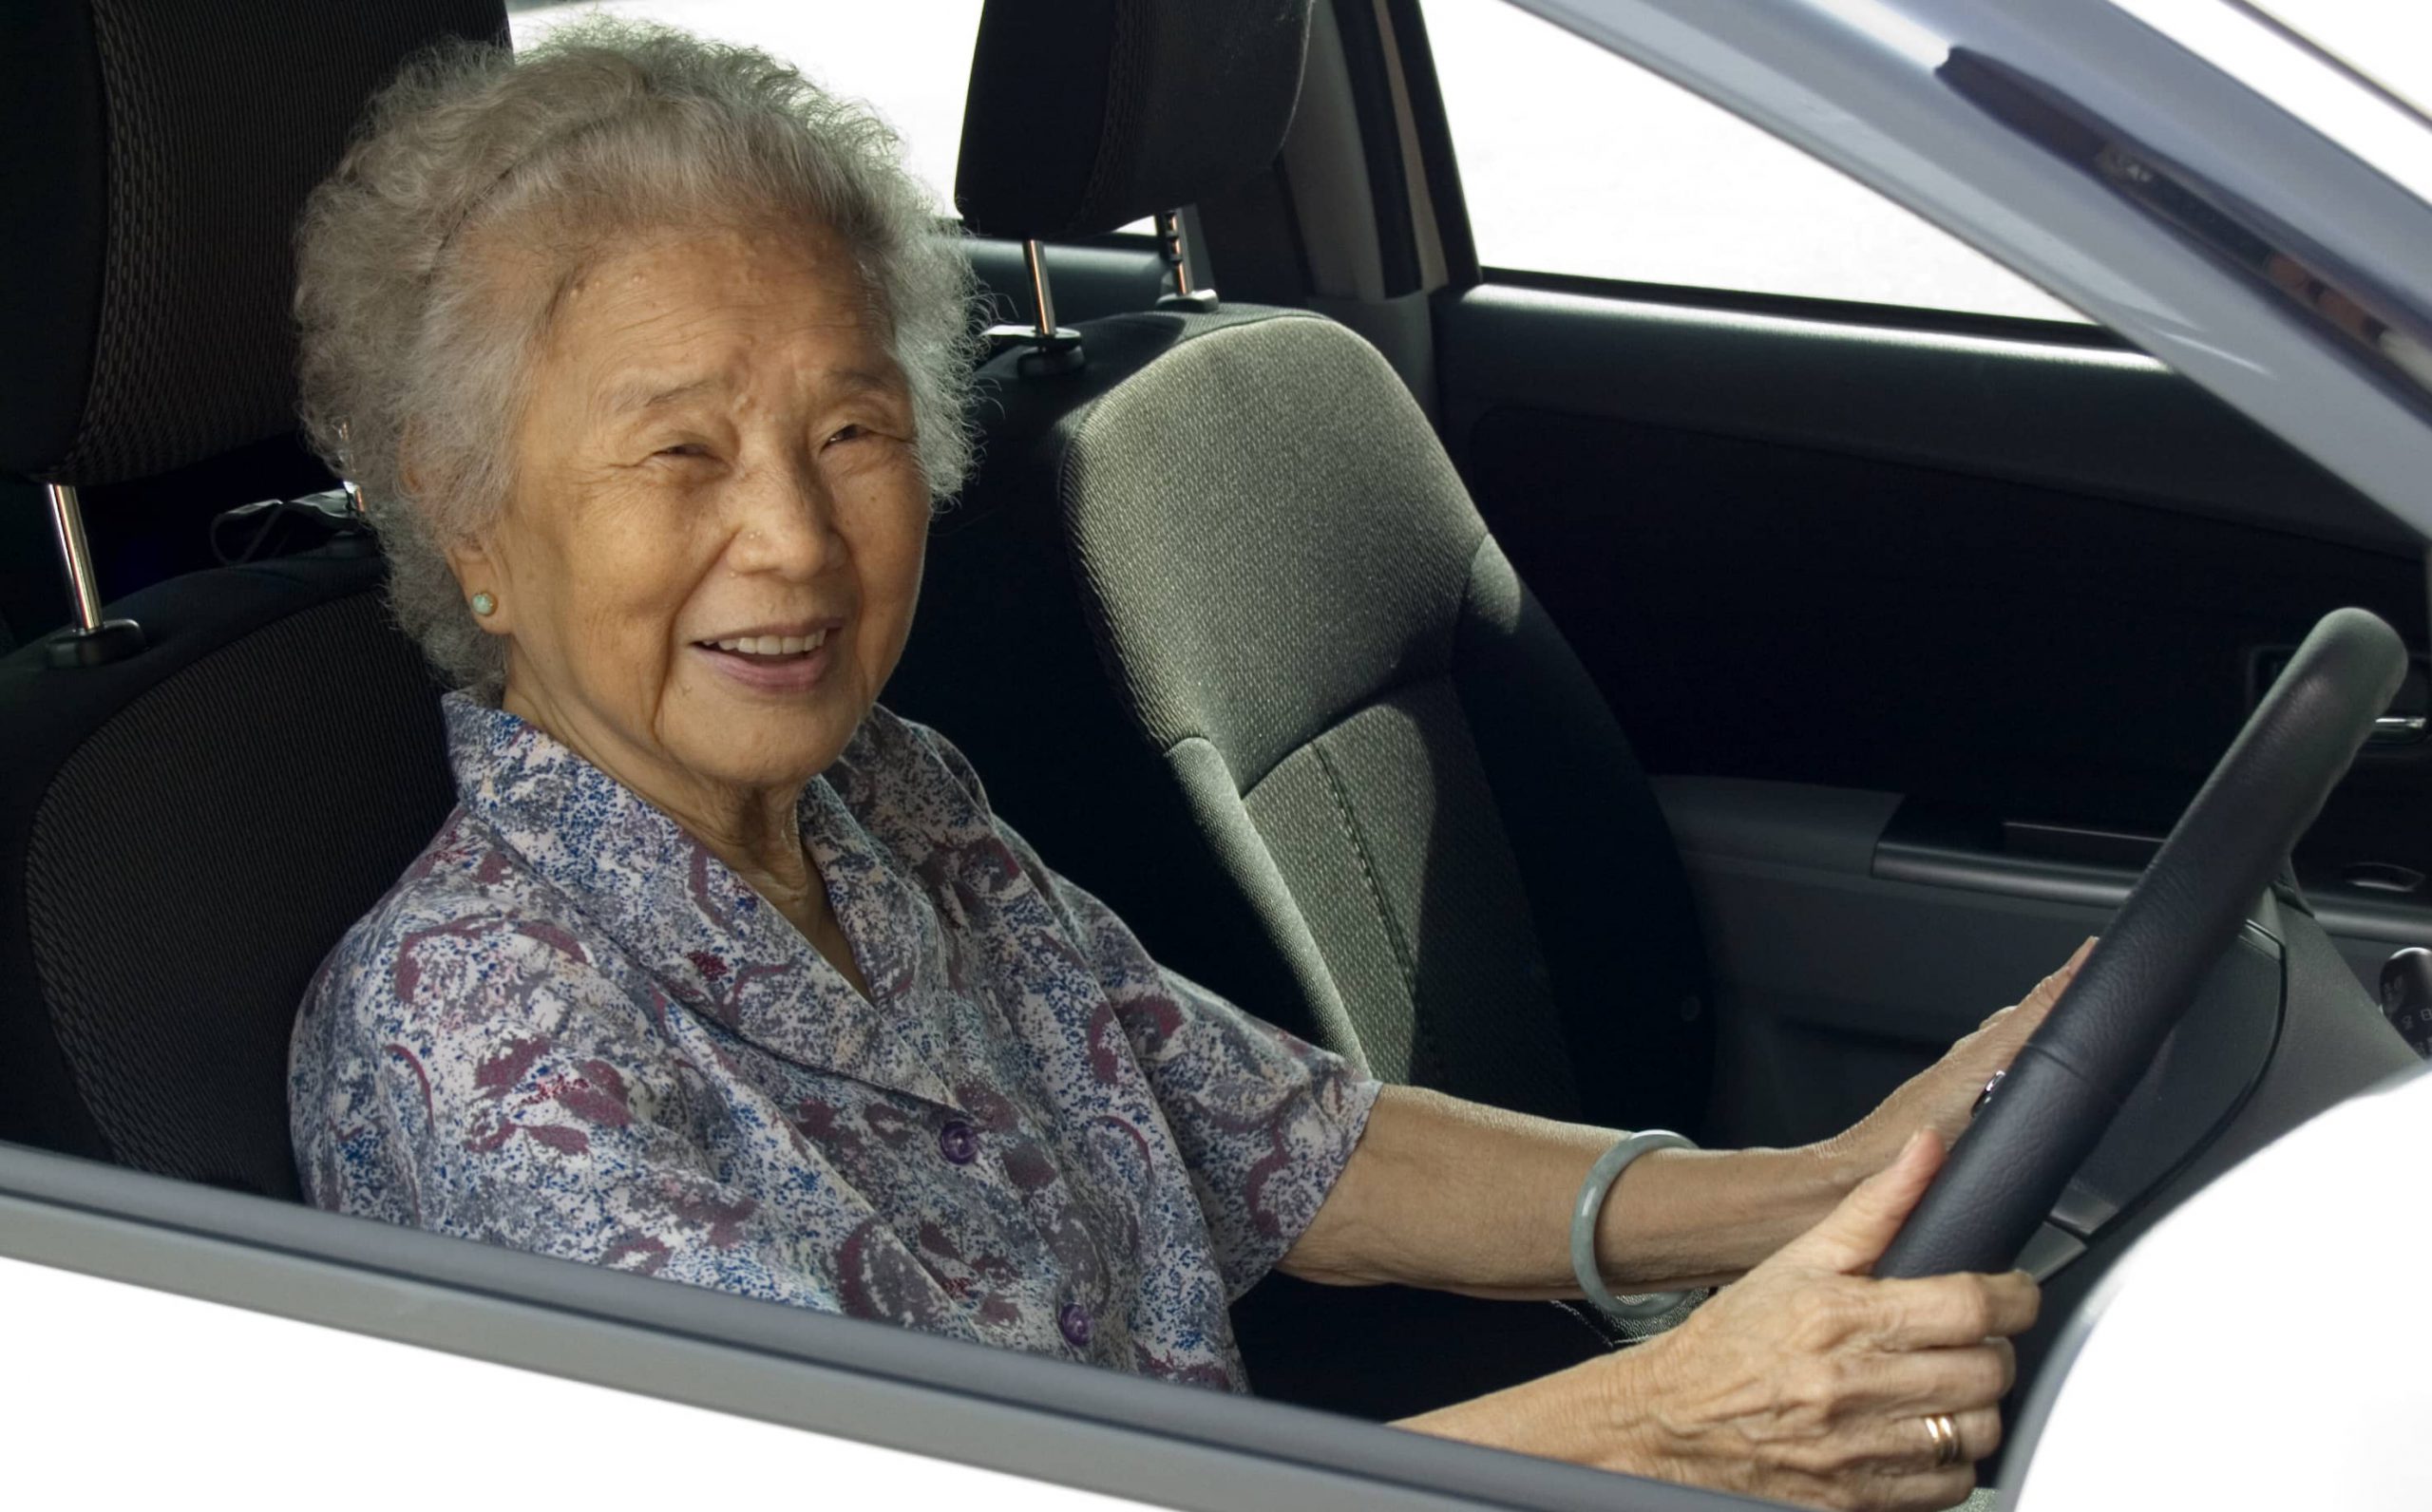 Woman over 65 driving to renew license